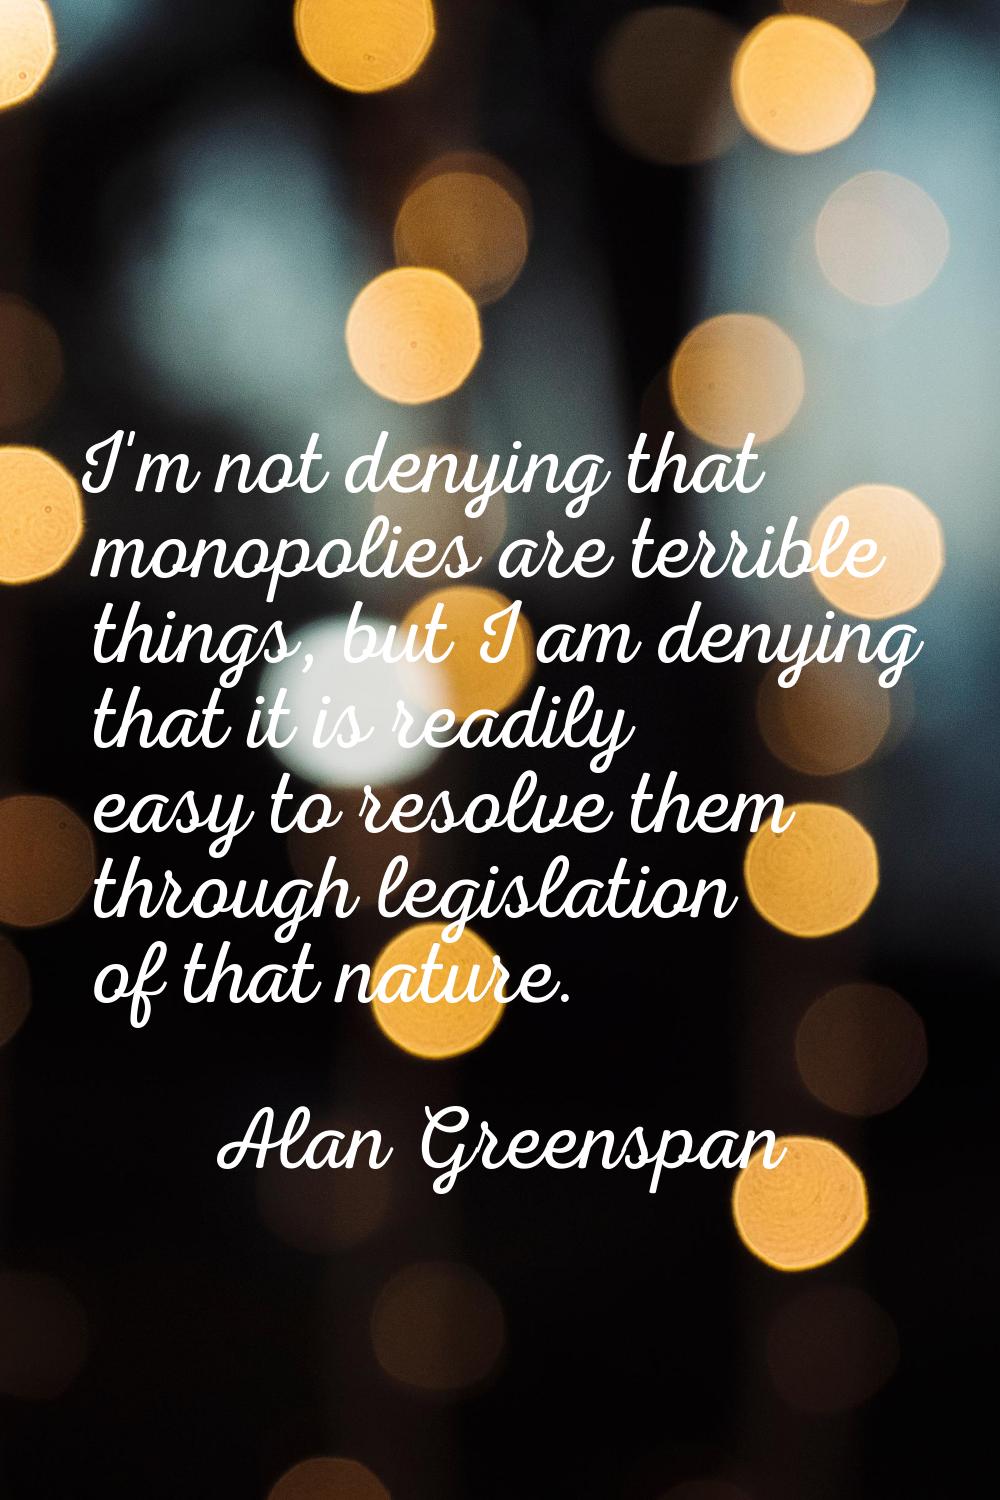 I'm not denying that monopolies are terrible things, but I am denying that it is readily easy to re